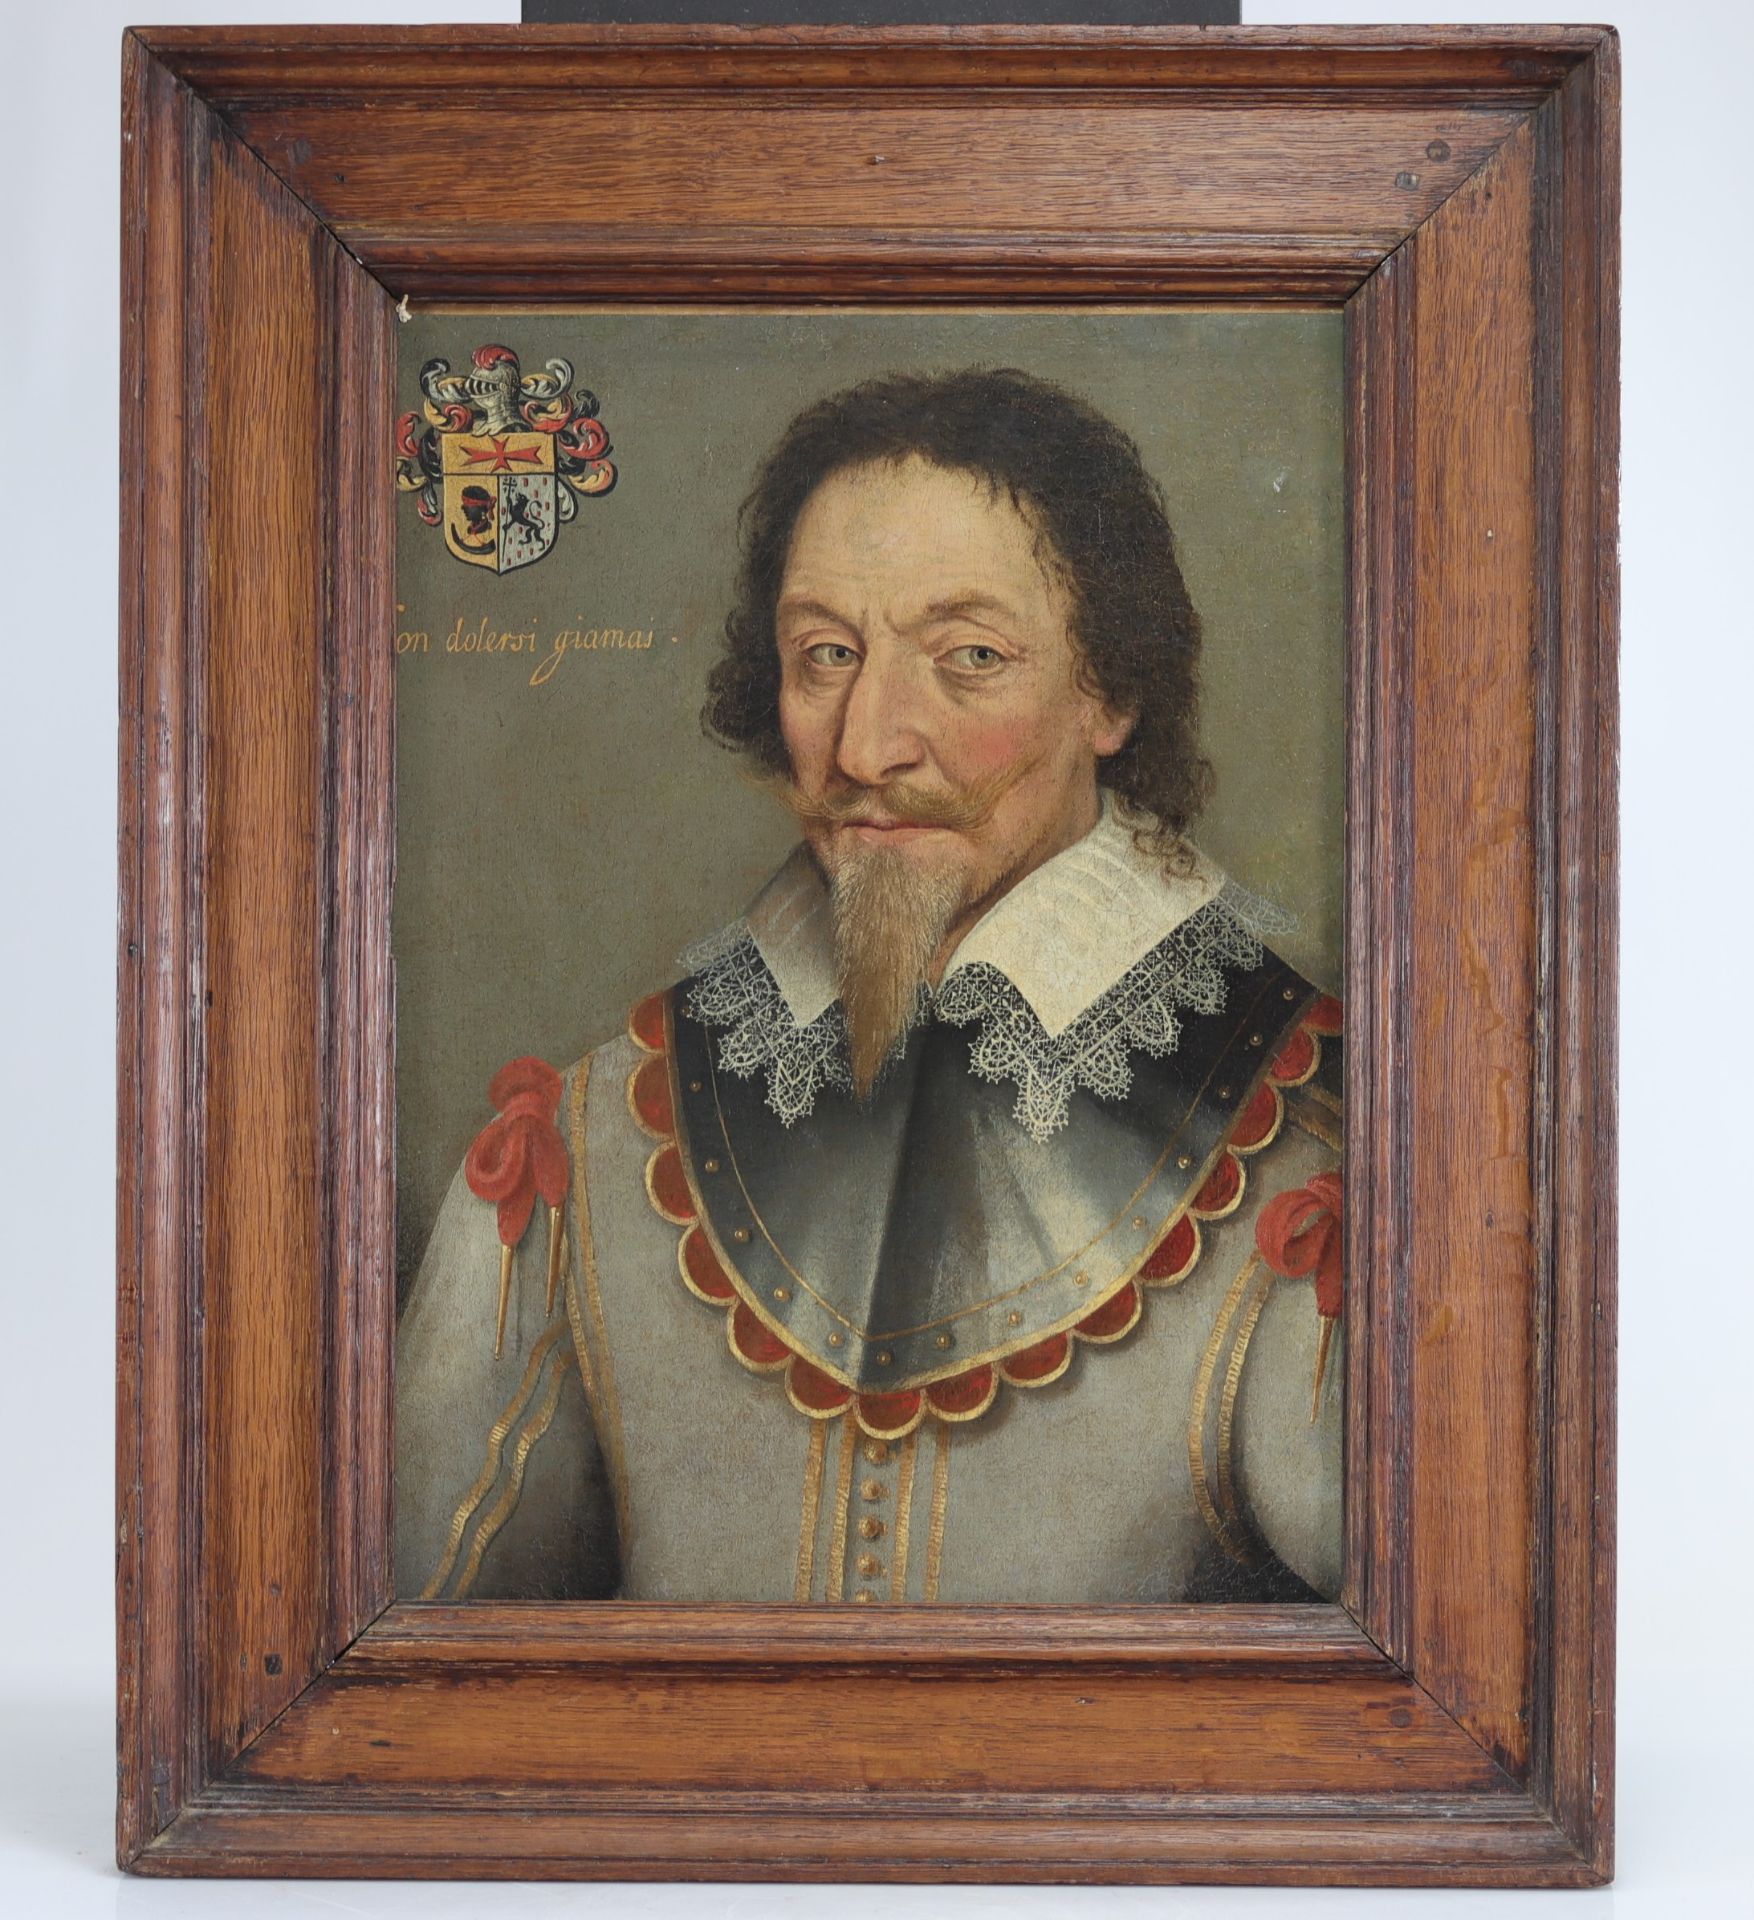 Portrait from Louis XIII period of the 17th century of a Corsican Nobleman from the Antwerp school - Bild 2 aus 2